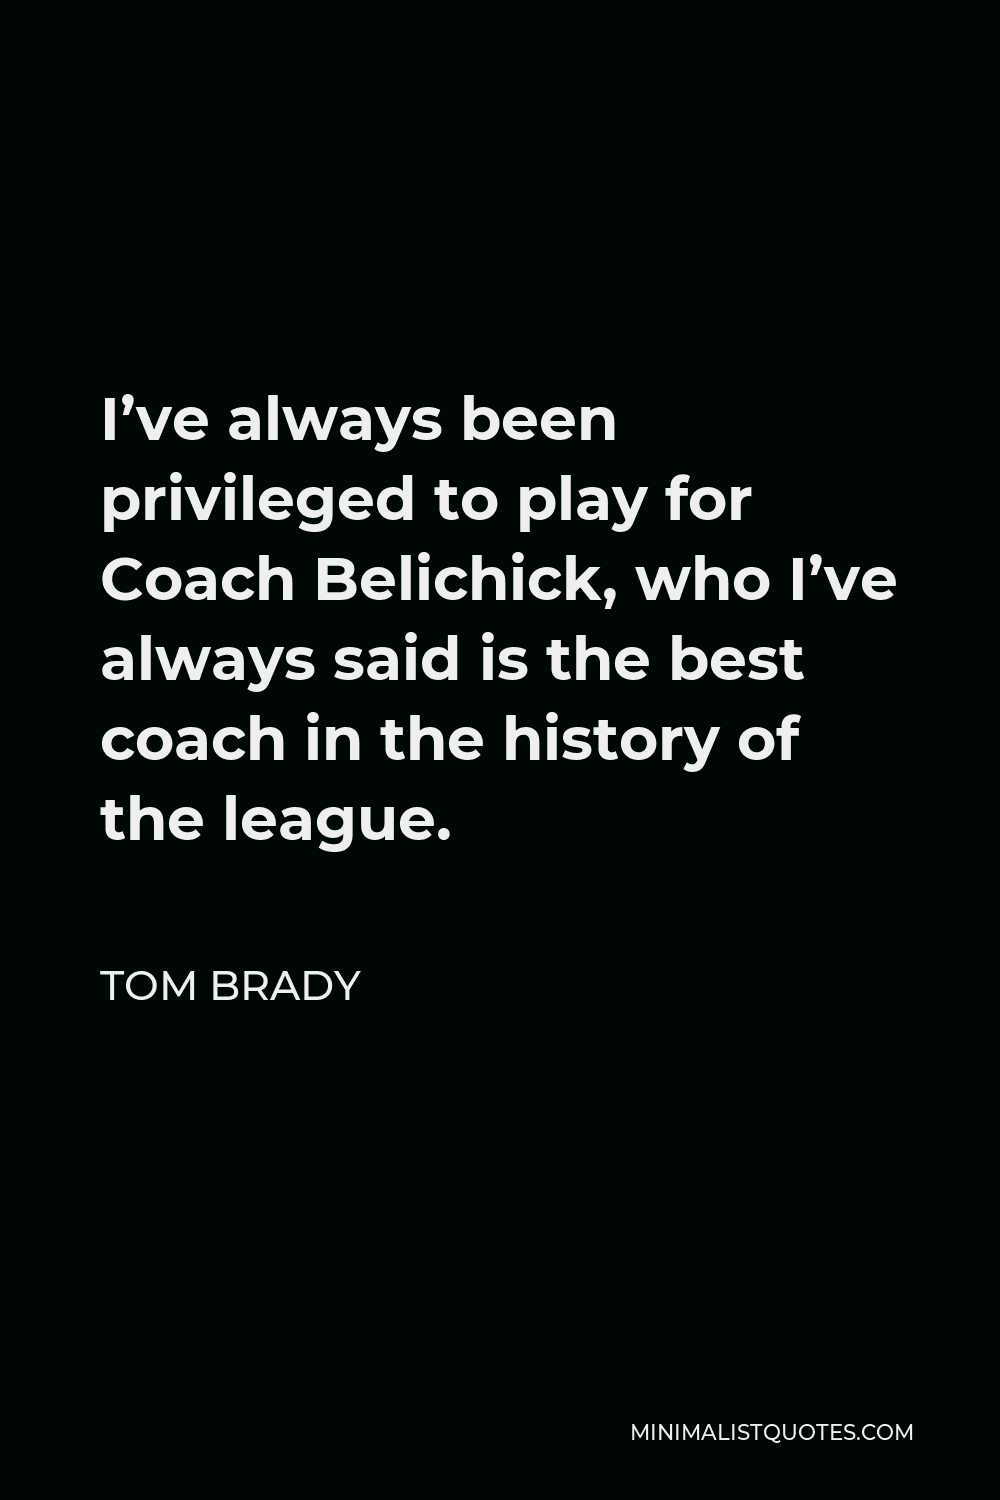 Tom Brady Quote - I’ve always been privileged to play for Coach Belichick, who I’ve always said is the best coach in the history of the league.